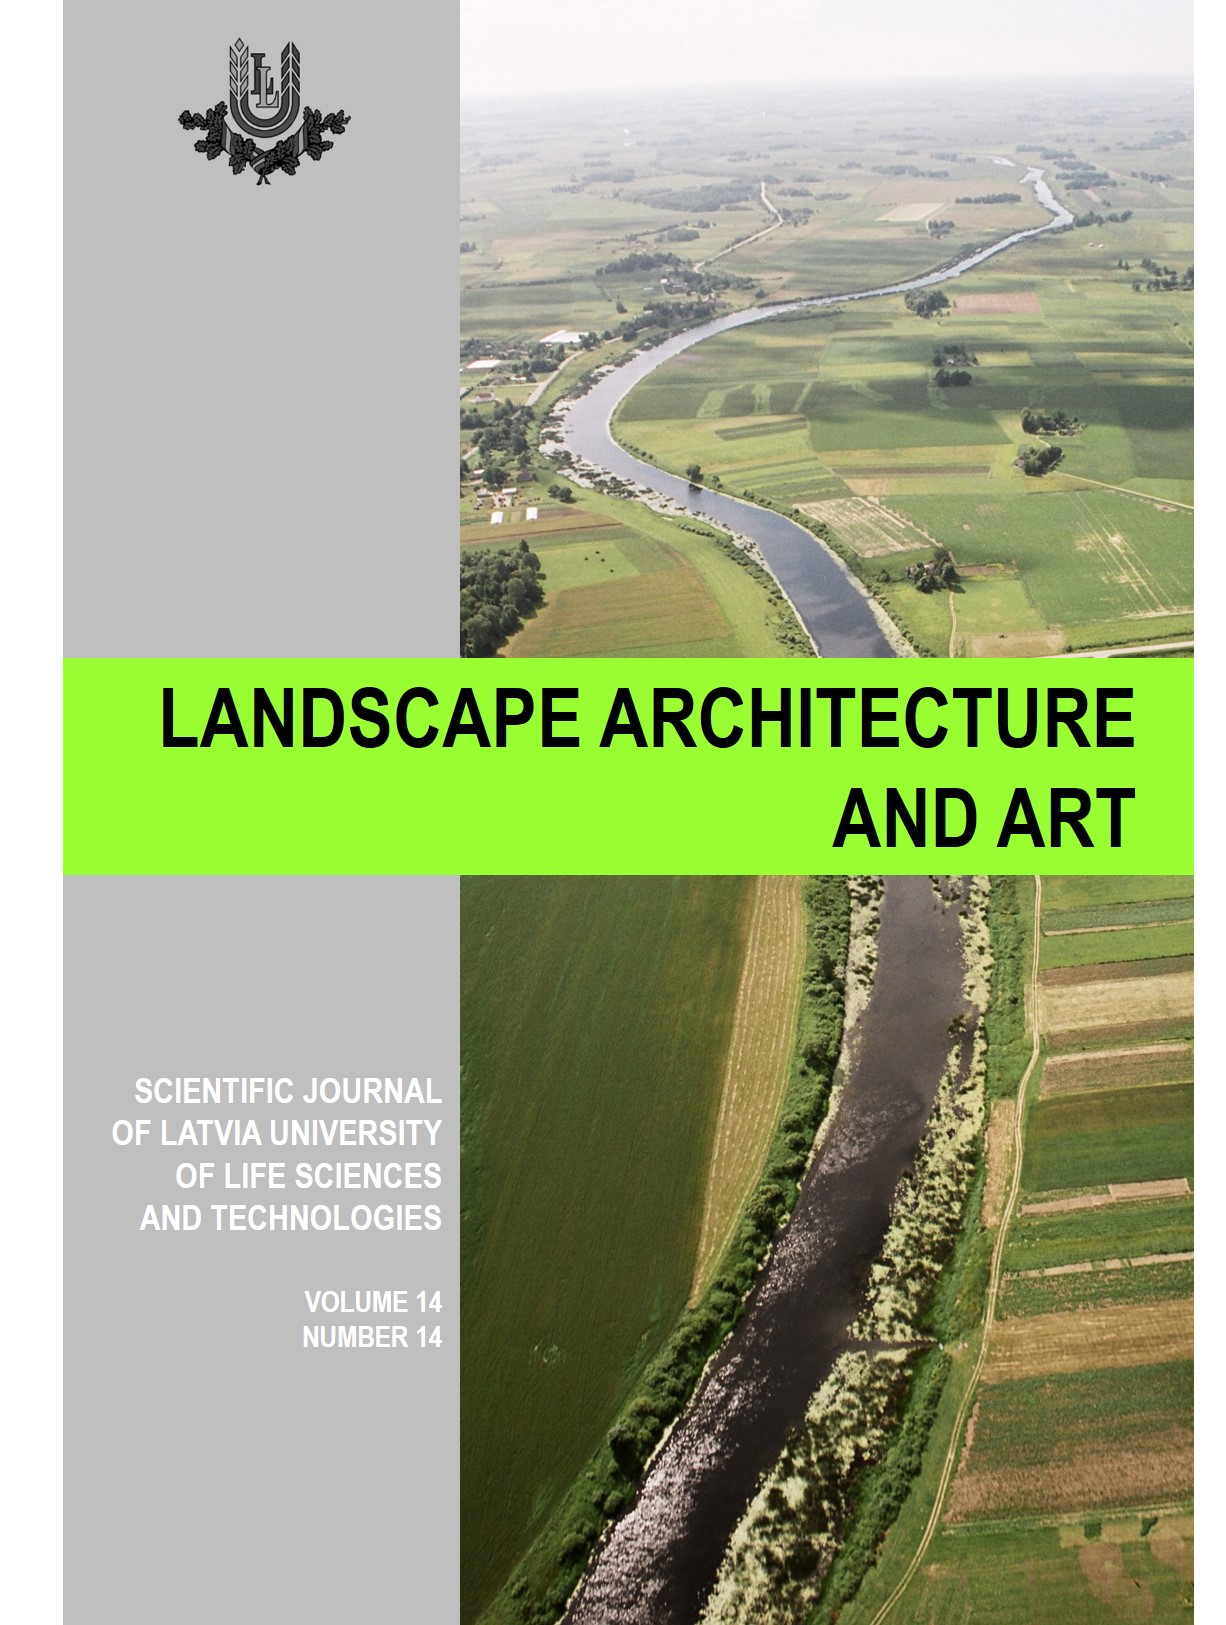 Landscape Architecture and Art, Volume 14, Number 14